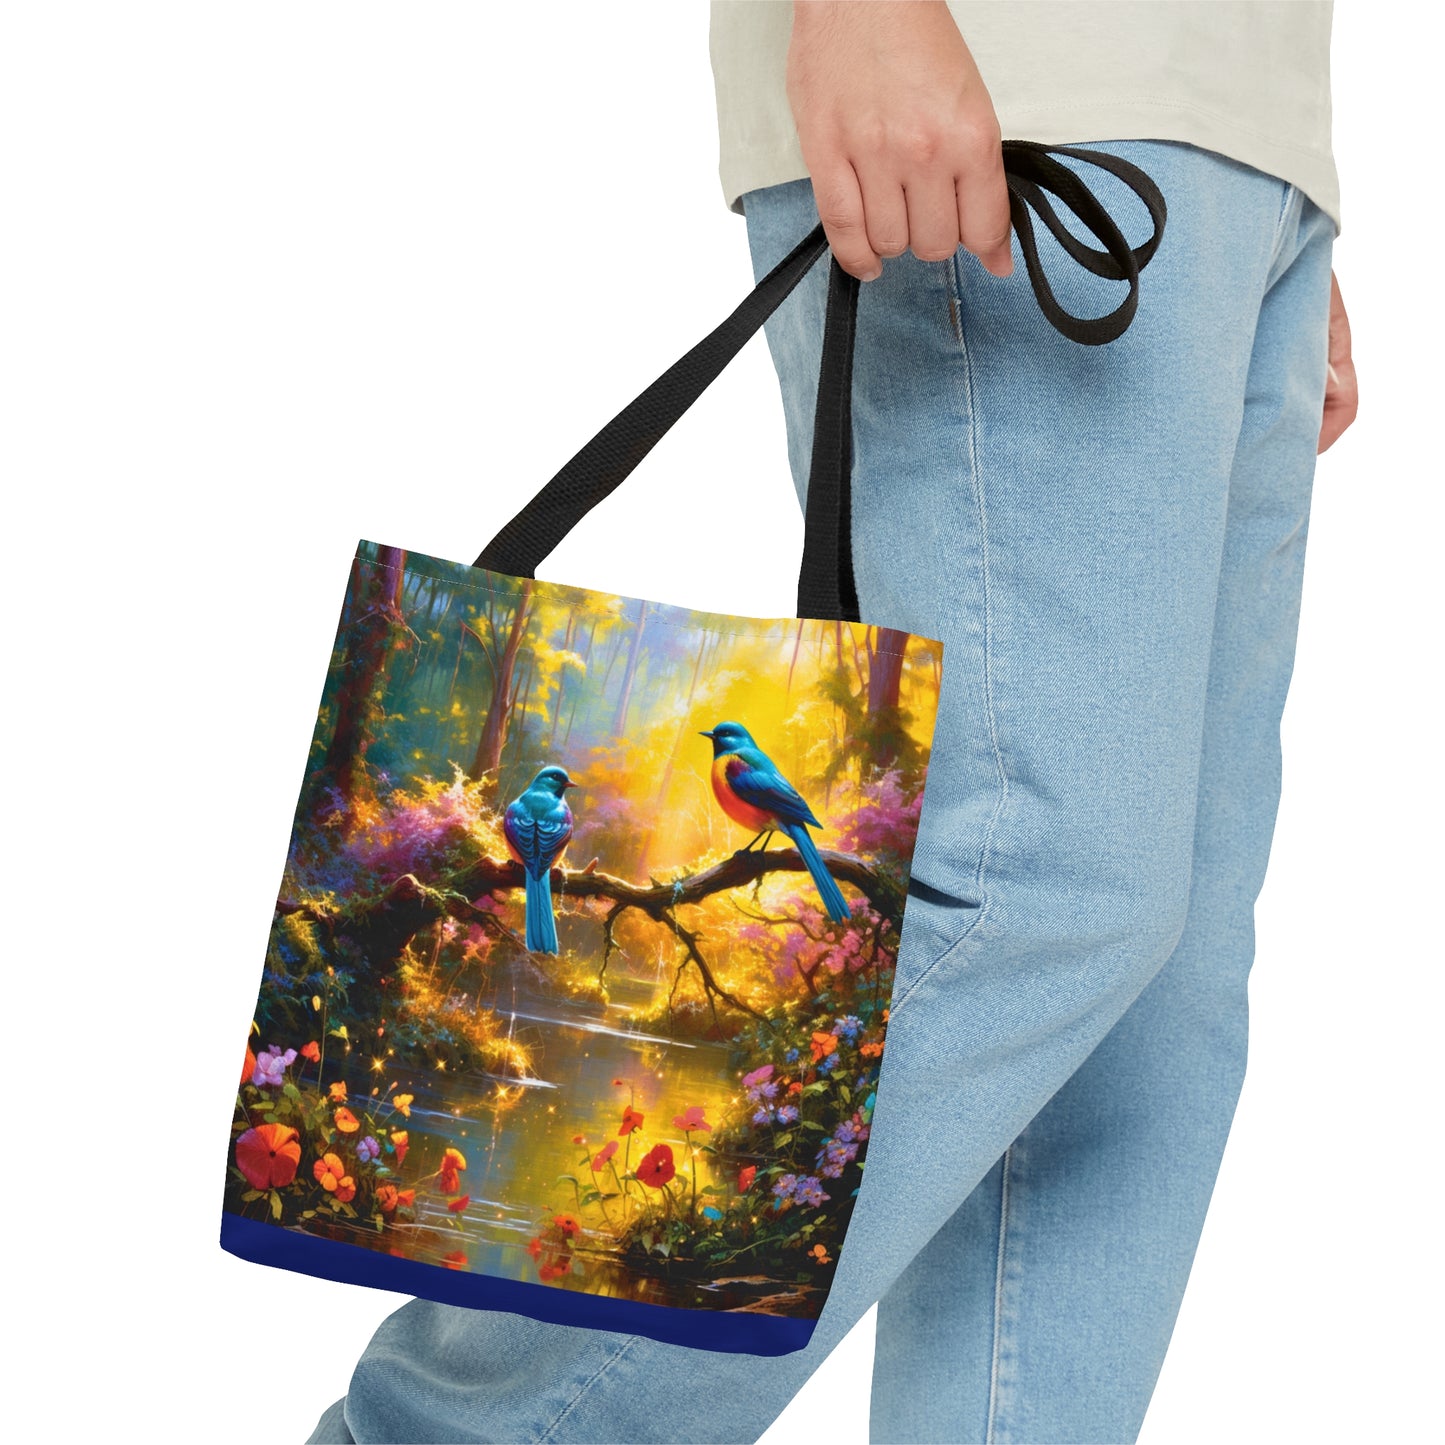 Tote Bag - Enchanted Forest 2